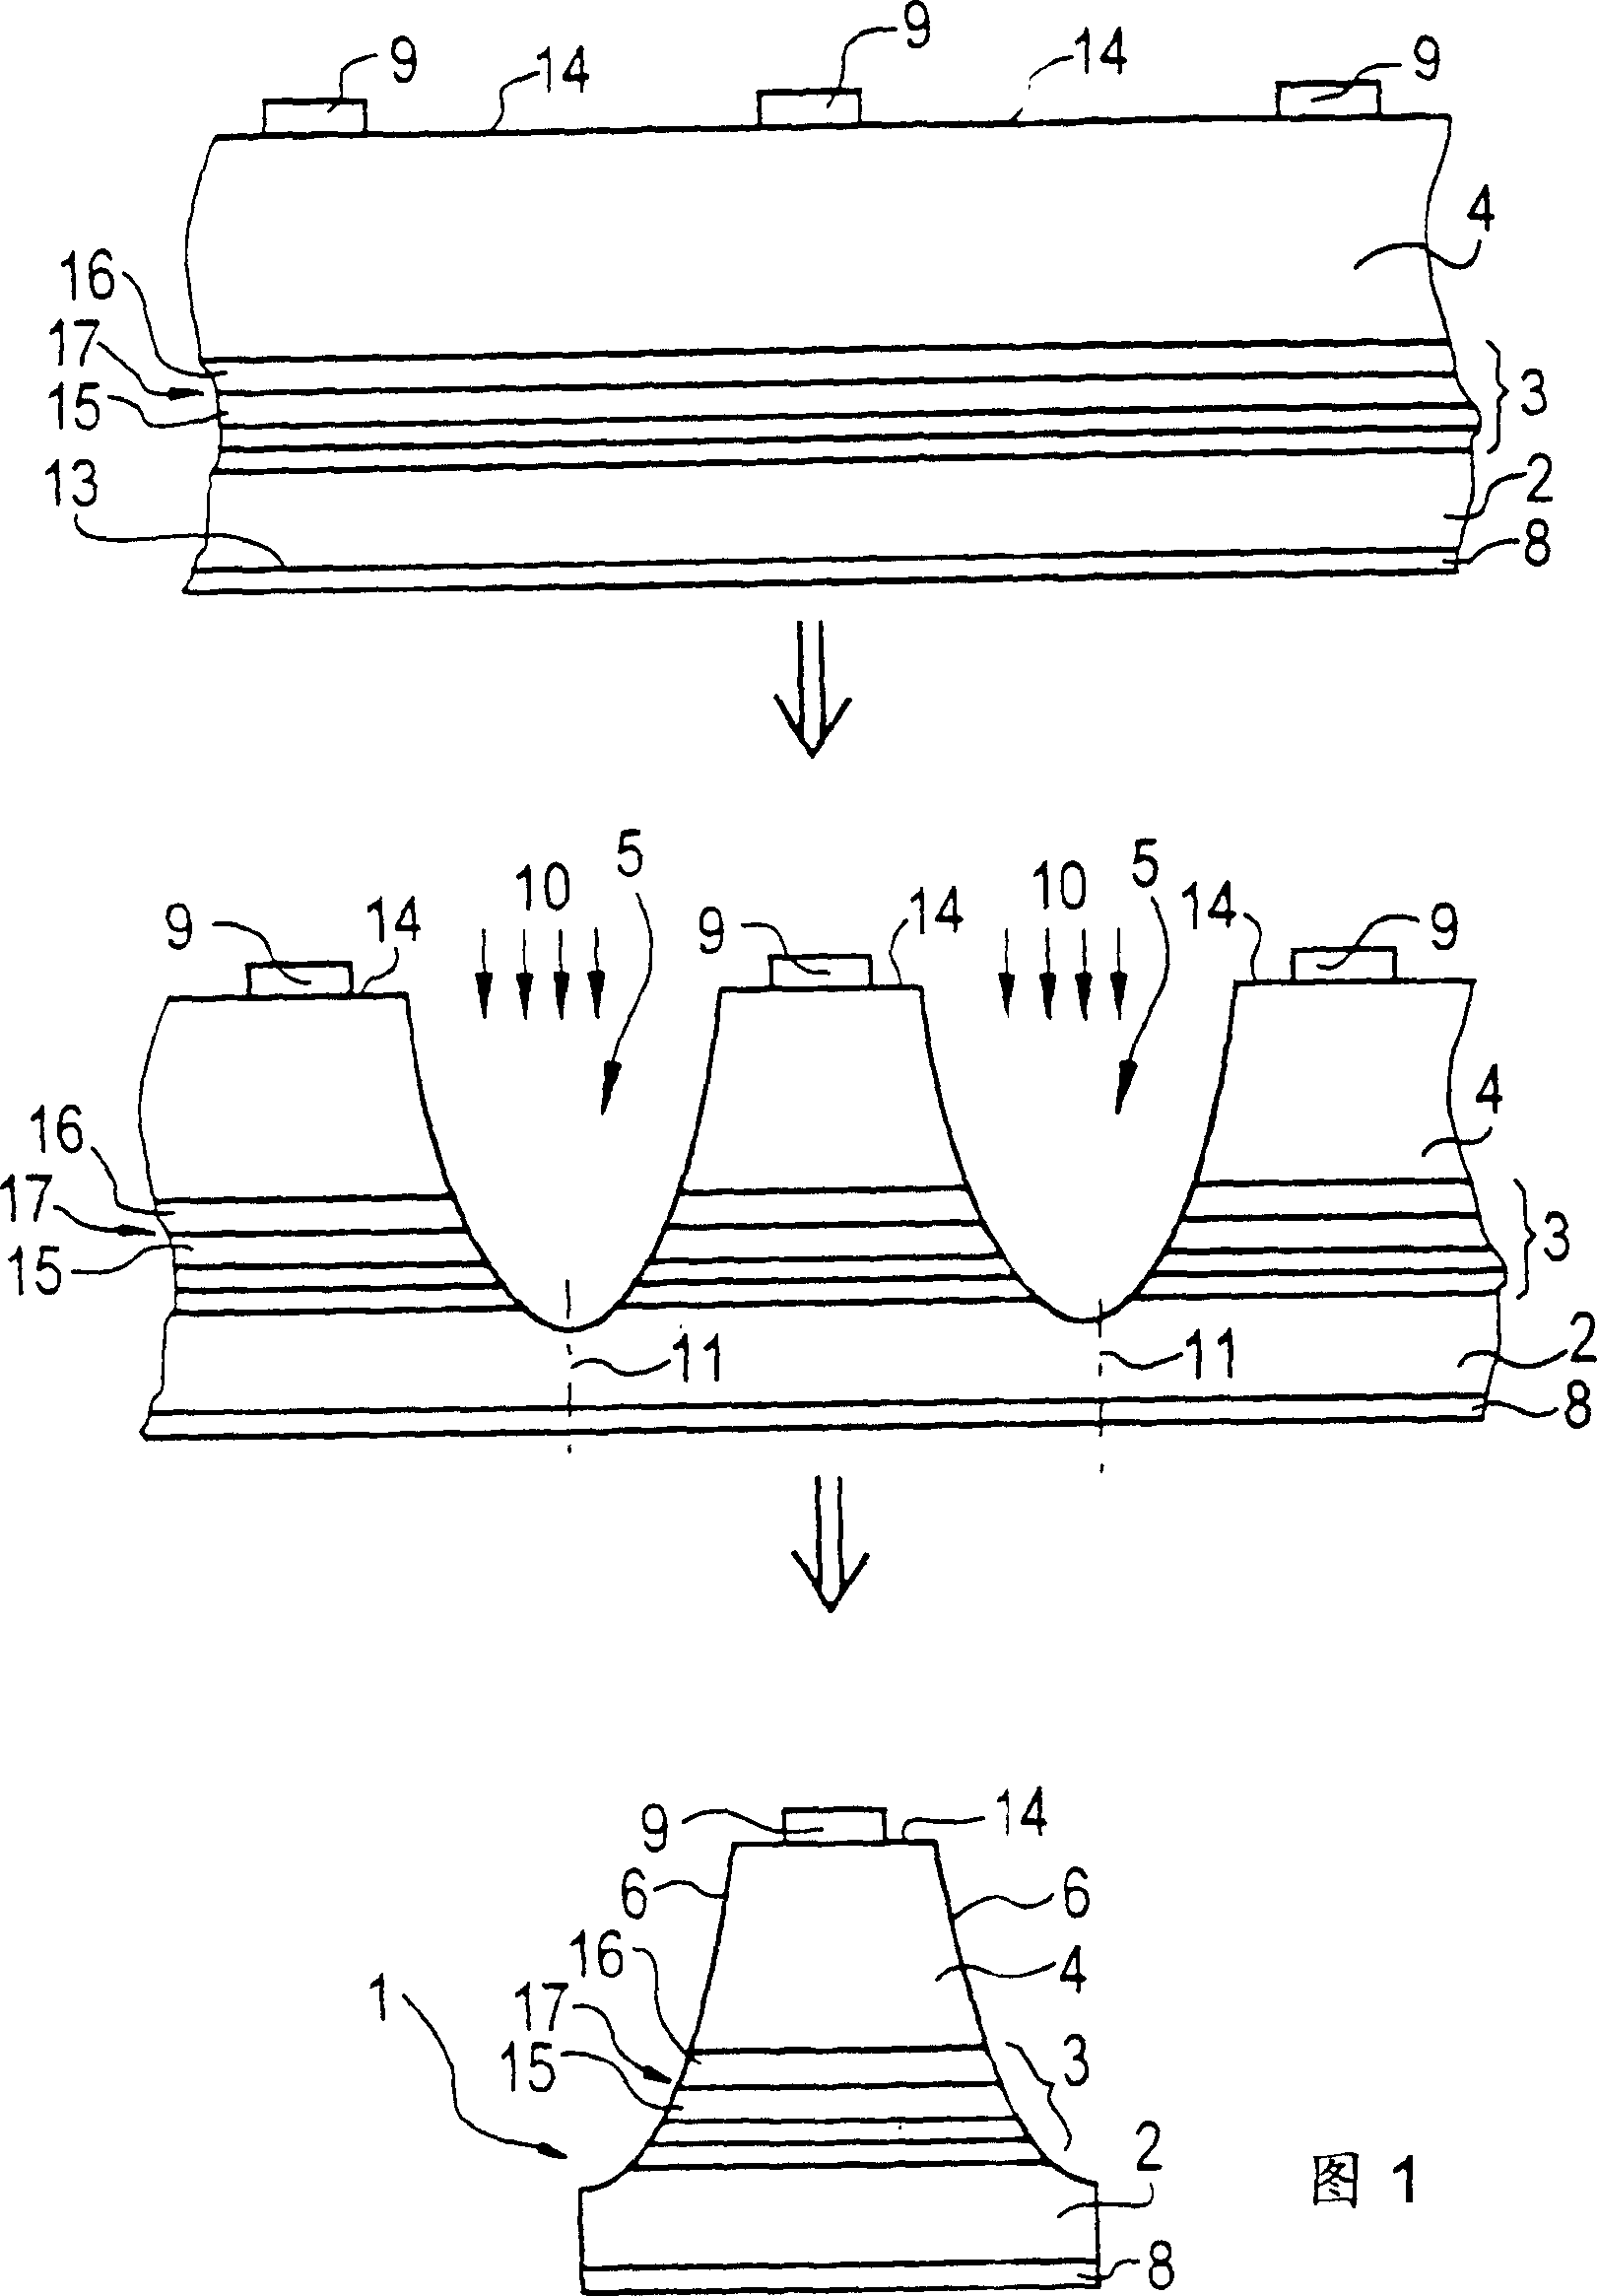 Process for producing semiconductor bodies with MOVPE-layer sequence